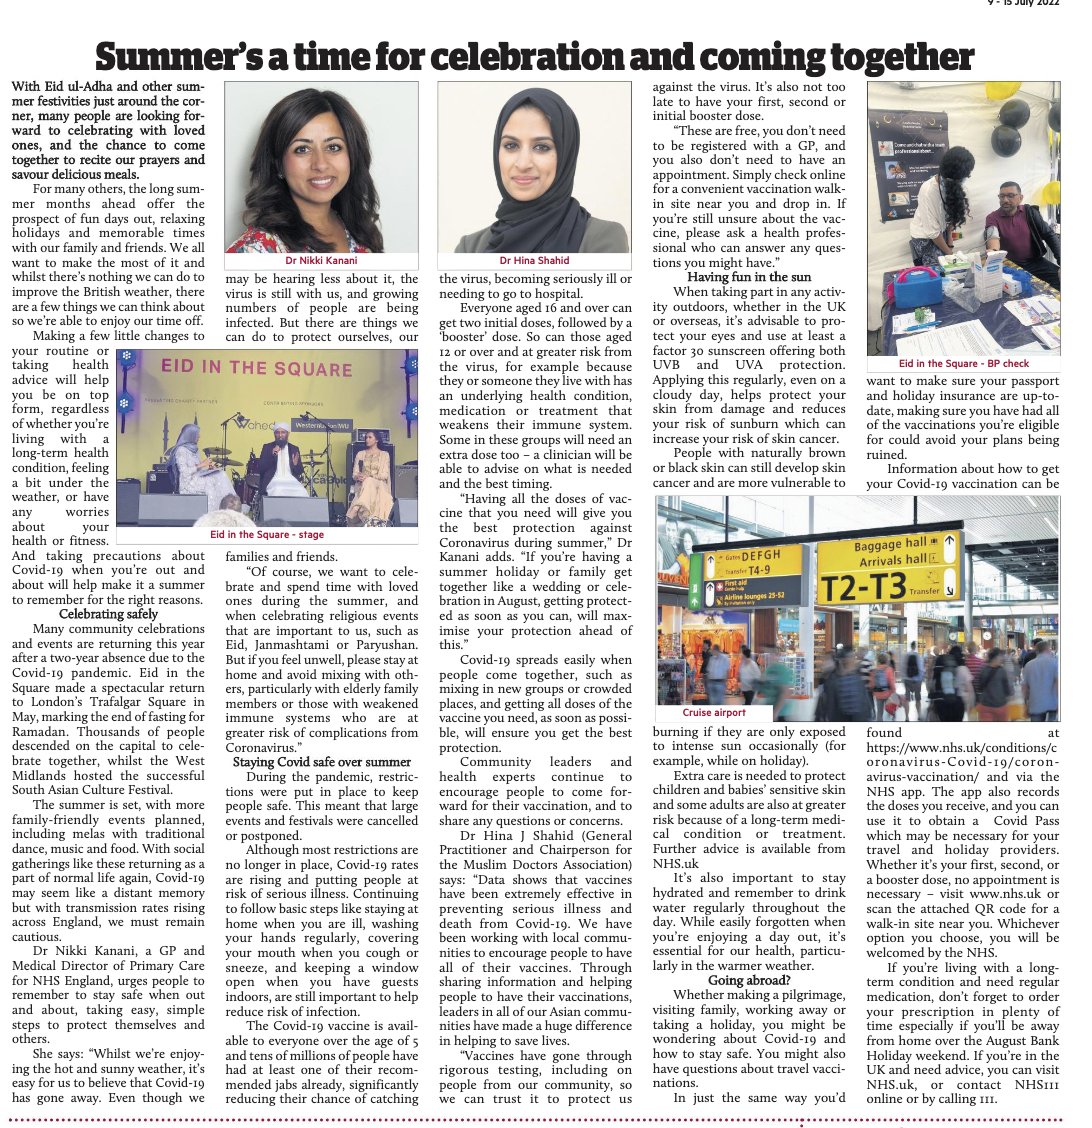 With #EidulAdha and other summer festivities just around the corner, many people are looking forward to celebrating with loved ones, and the chance to come together to recite our prayers and savour delicious meals. Read: asian-voice.com/News/UK/Summer… @NikkiKF @hinajshahid